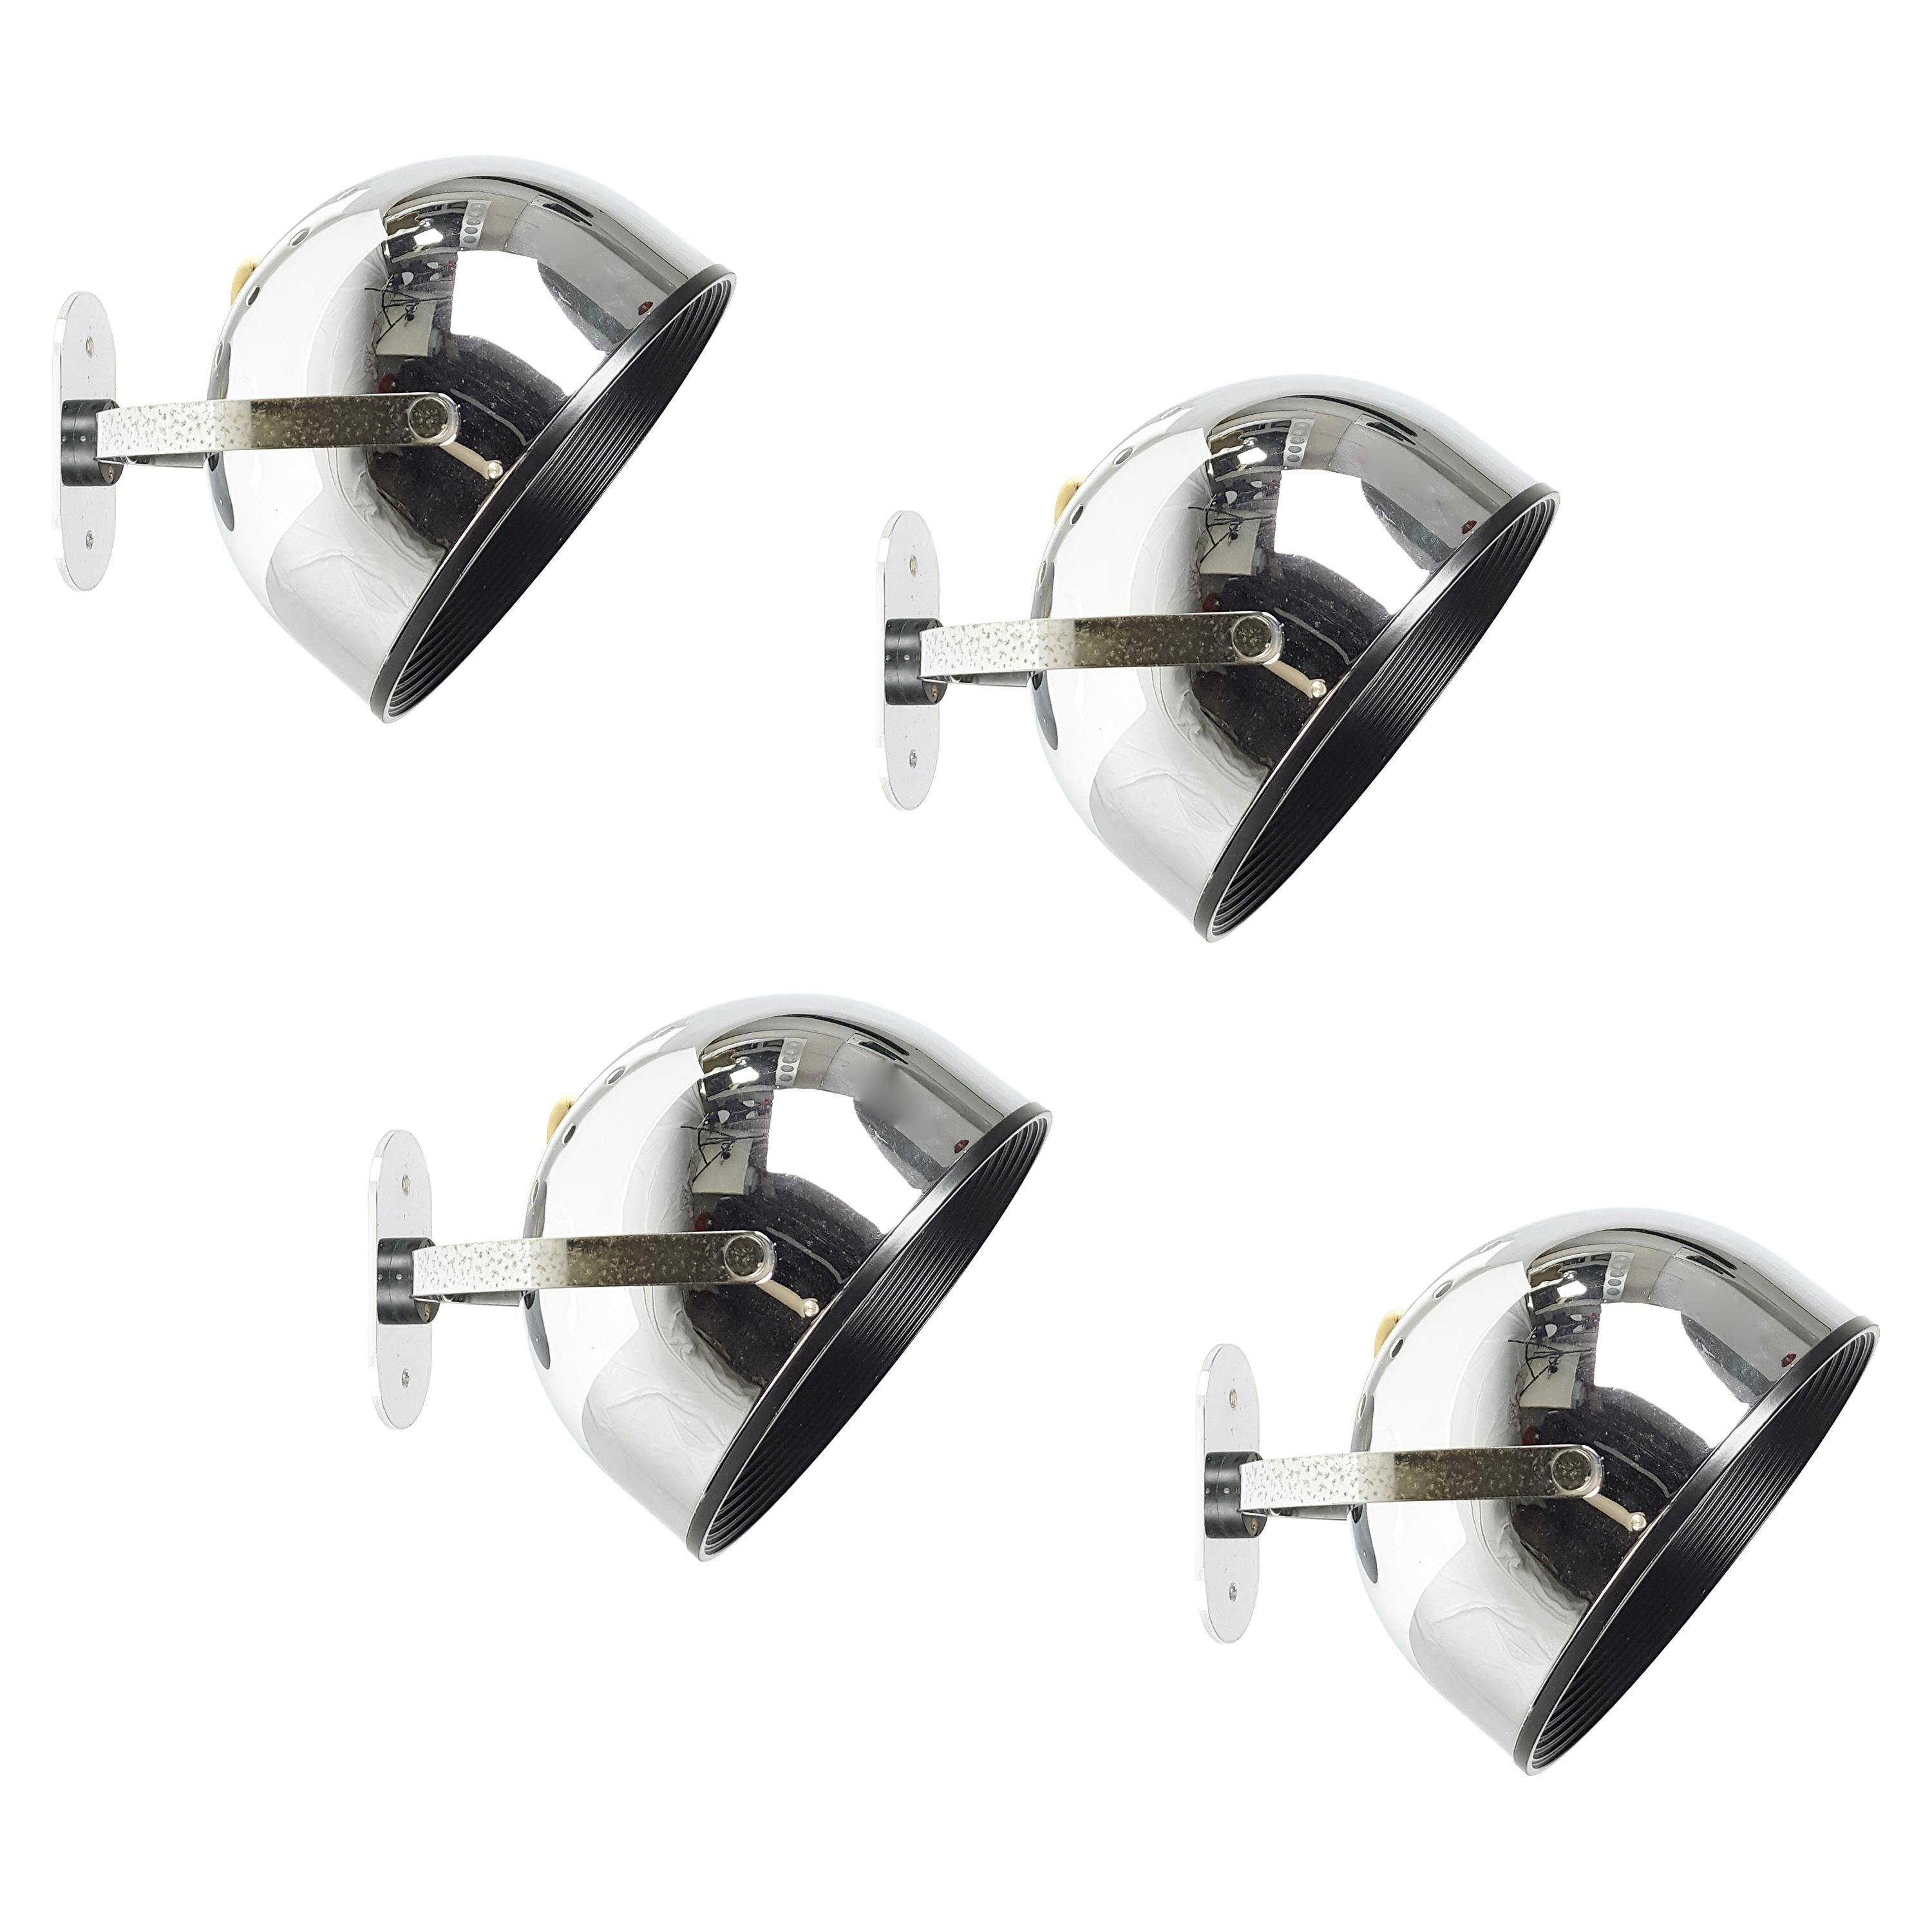 Chrome-Plated & Painted Metal 1960s-1970s Wall Lamps by Gae Aulenti for Stilnovo